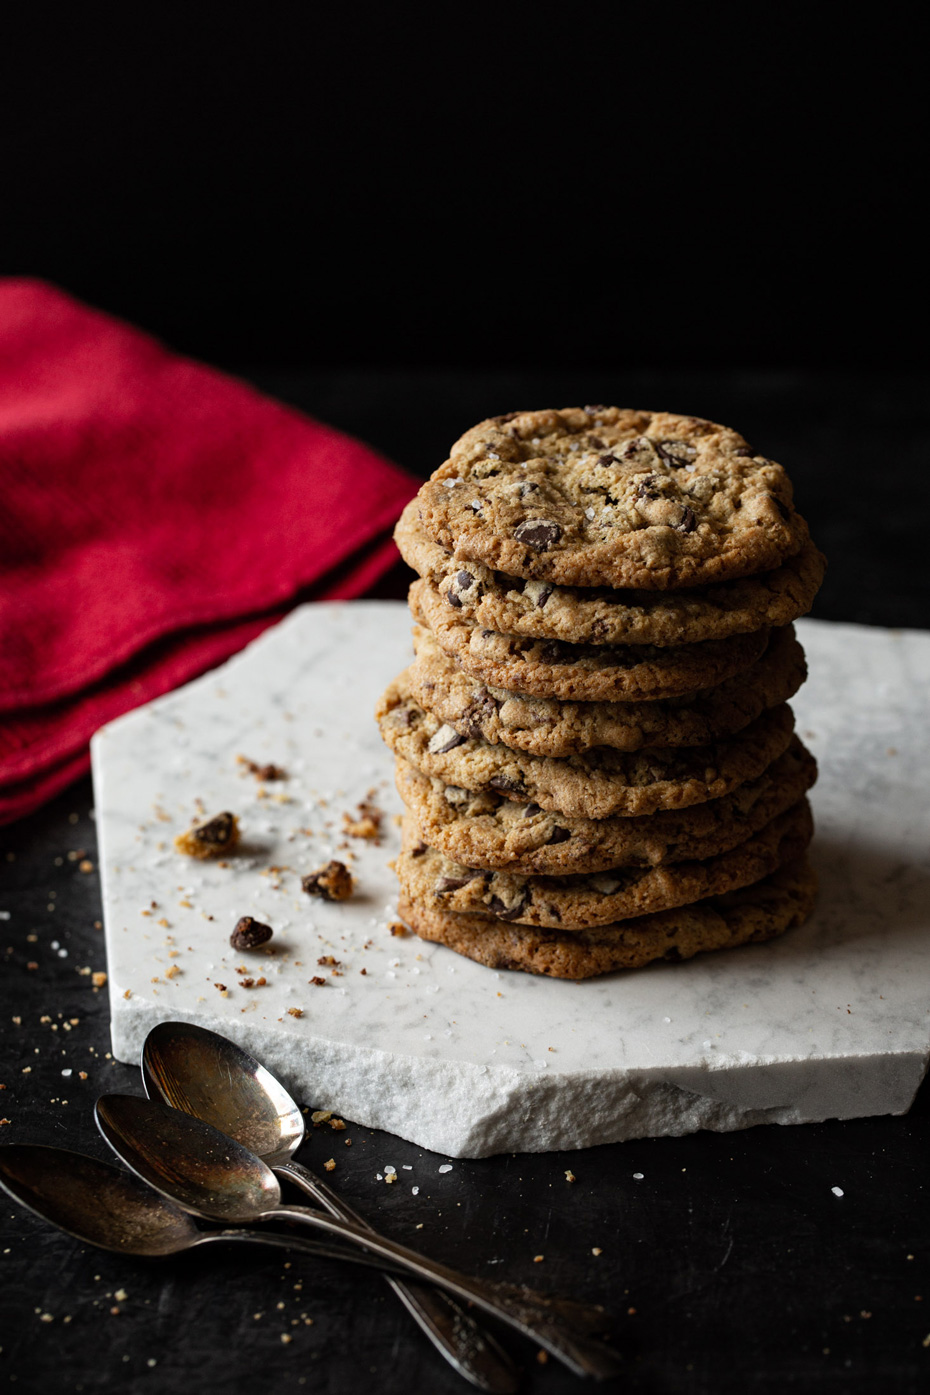 Stack of gluten free chocolate chip cookies - John Robson Photography